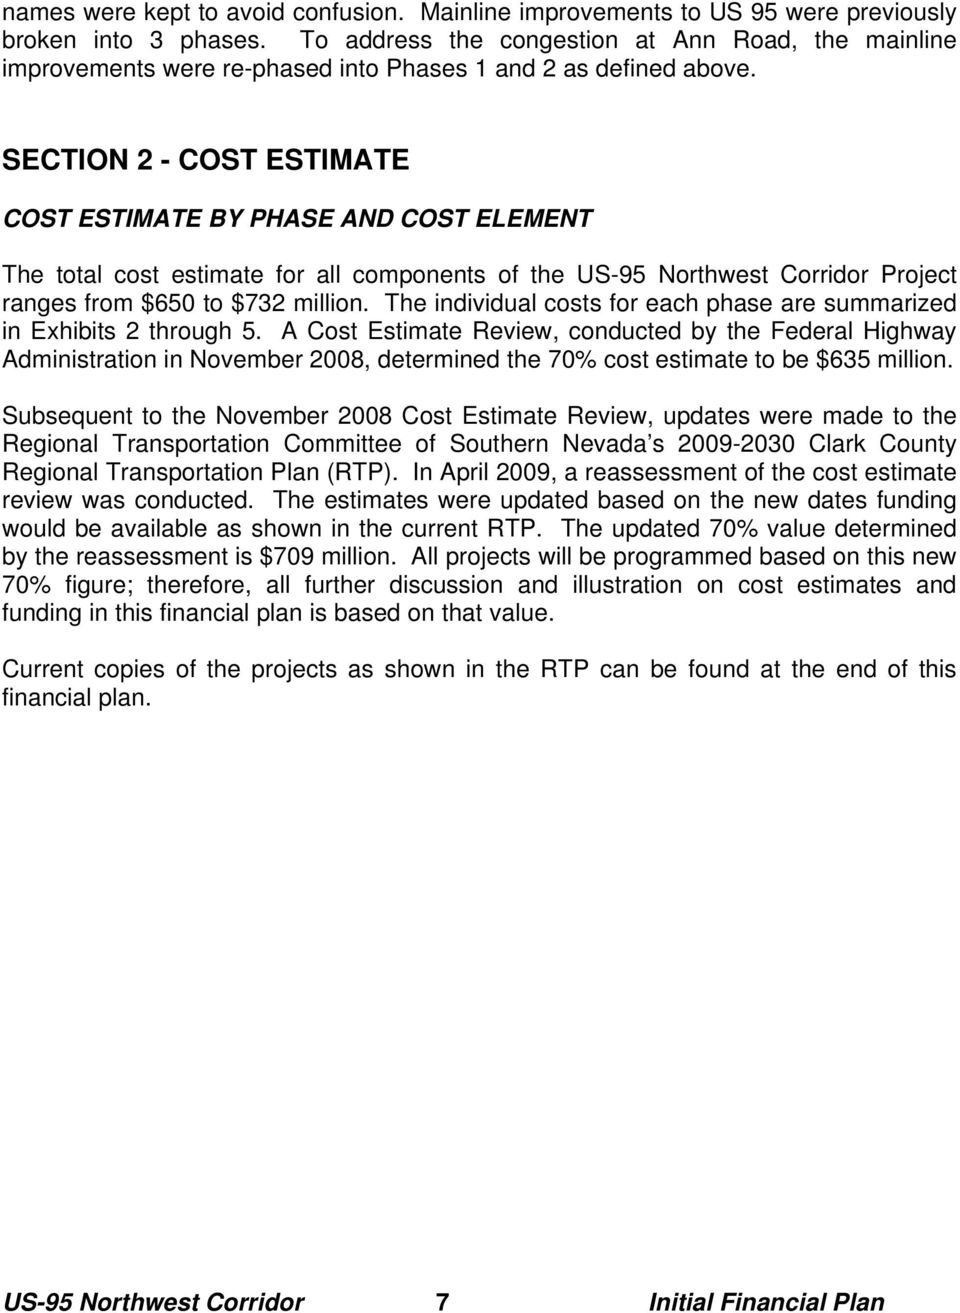 SECTION 2 - COST ESTIMATE COST ESTIMATE BY PHASE AND COST ELEMENT The total cost estimate for all components of the US-95 Northwest Corridor Project ranges from $650 to $732 million.